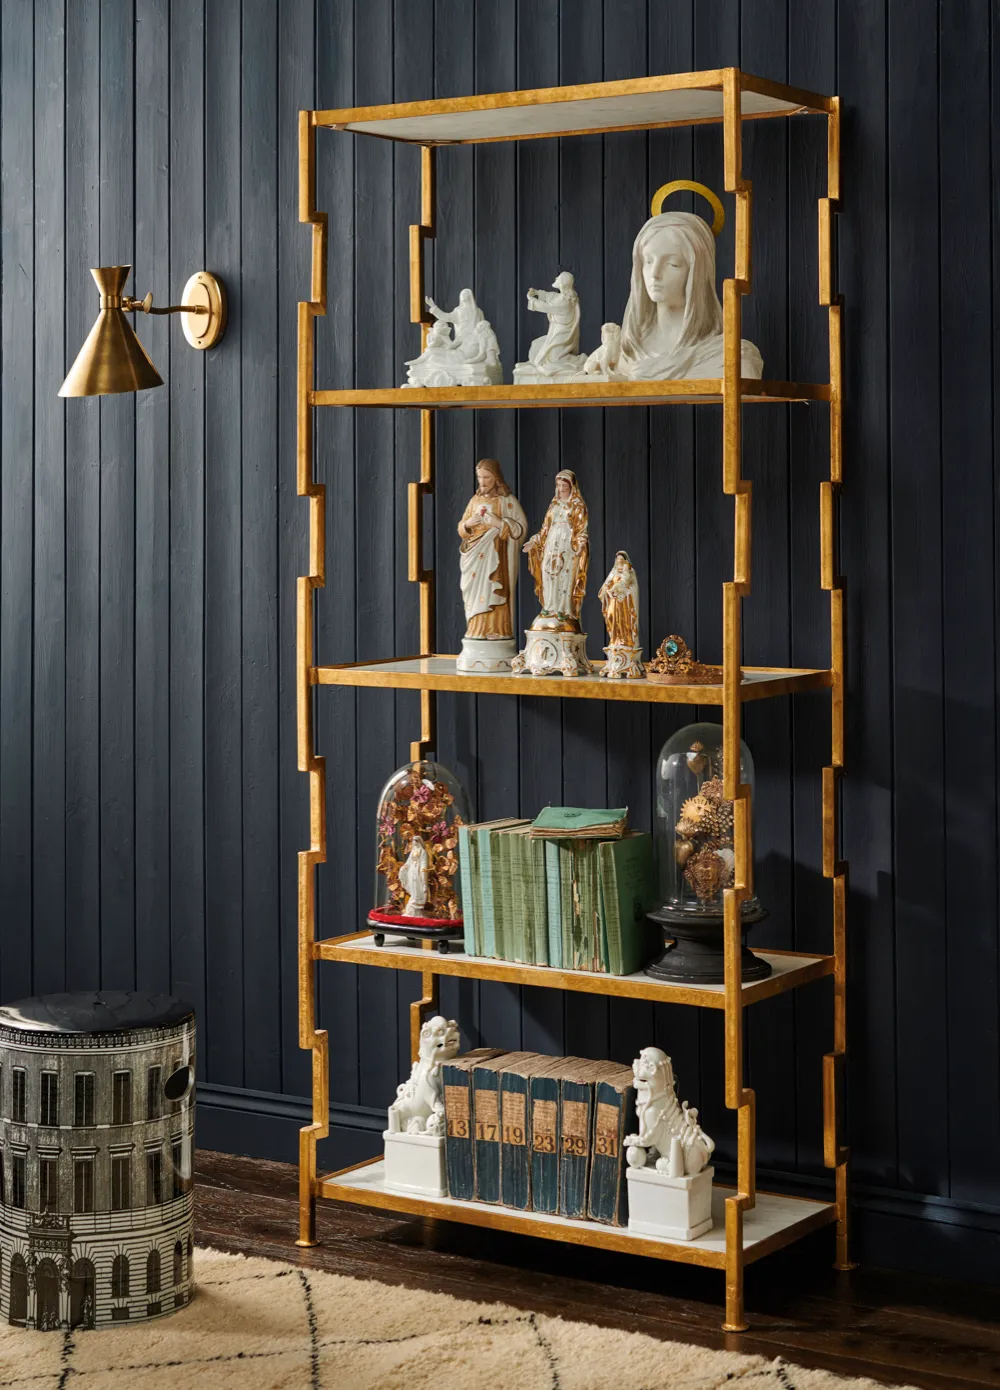 Antique and vintage figures displayed on a gold shelf next to a printed stool with antique books, brass wall light and display domes